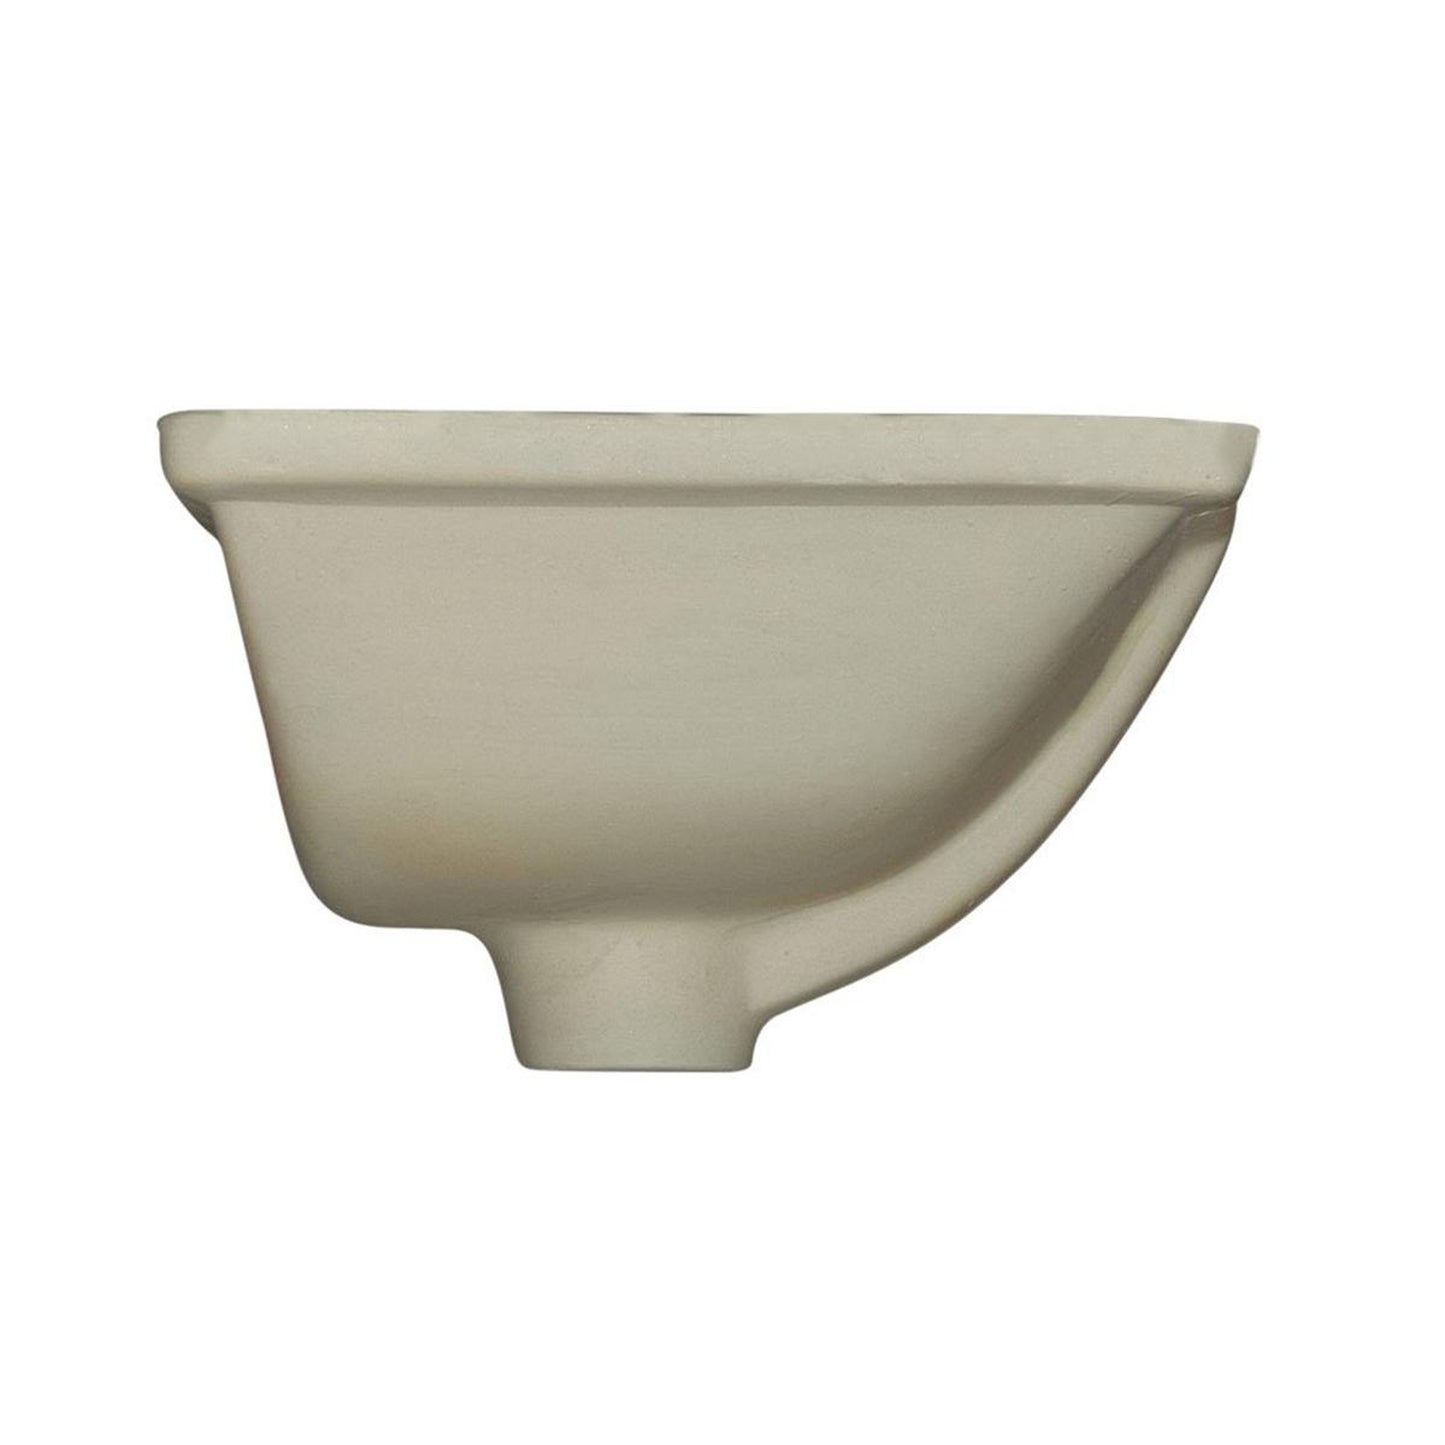 Pelican Int'l Pearl Series PL-3088 16" x 11" Individually Packaged White Porcelain Undermount Bathroom Sink